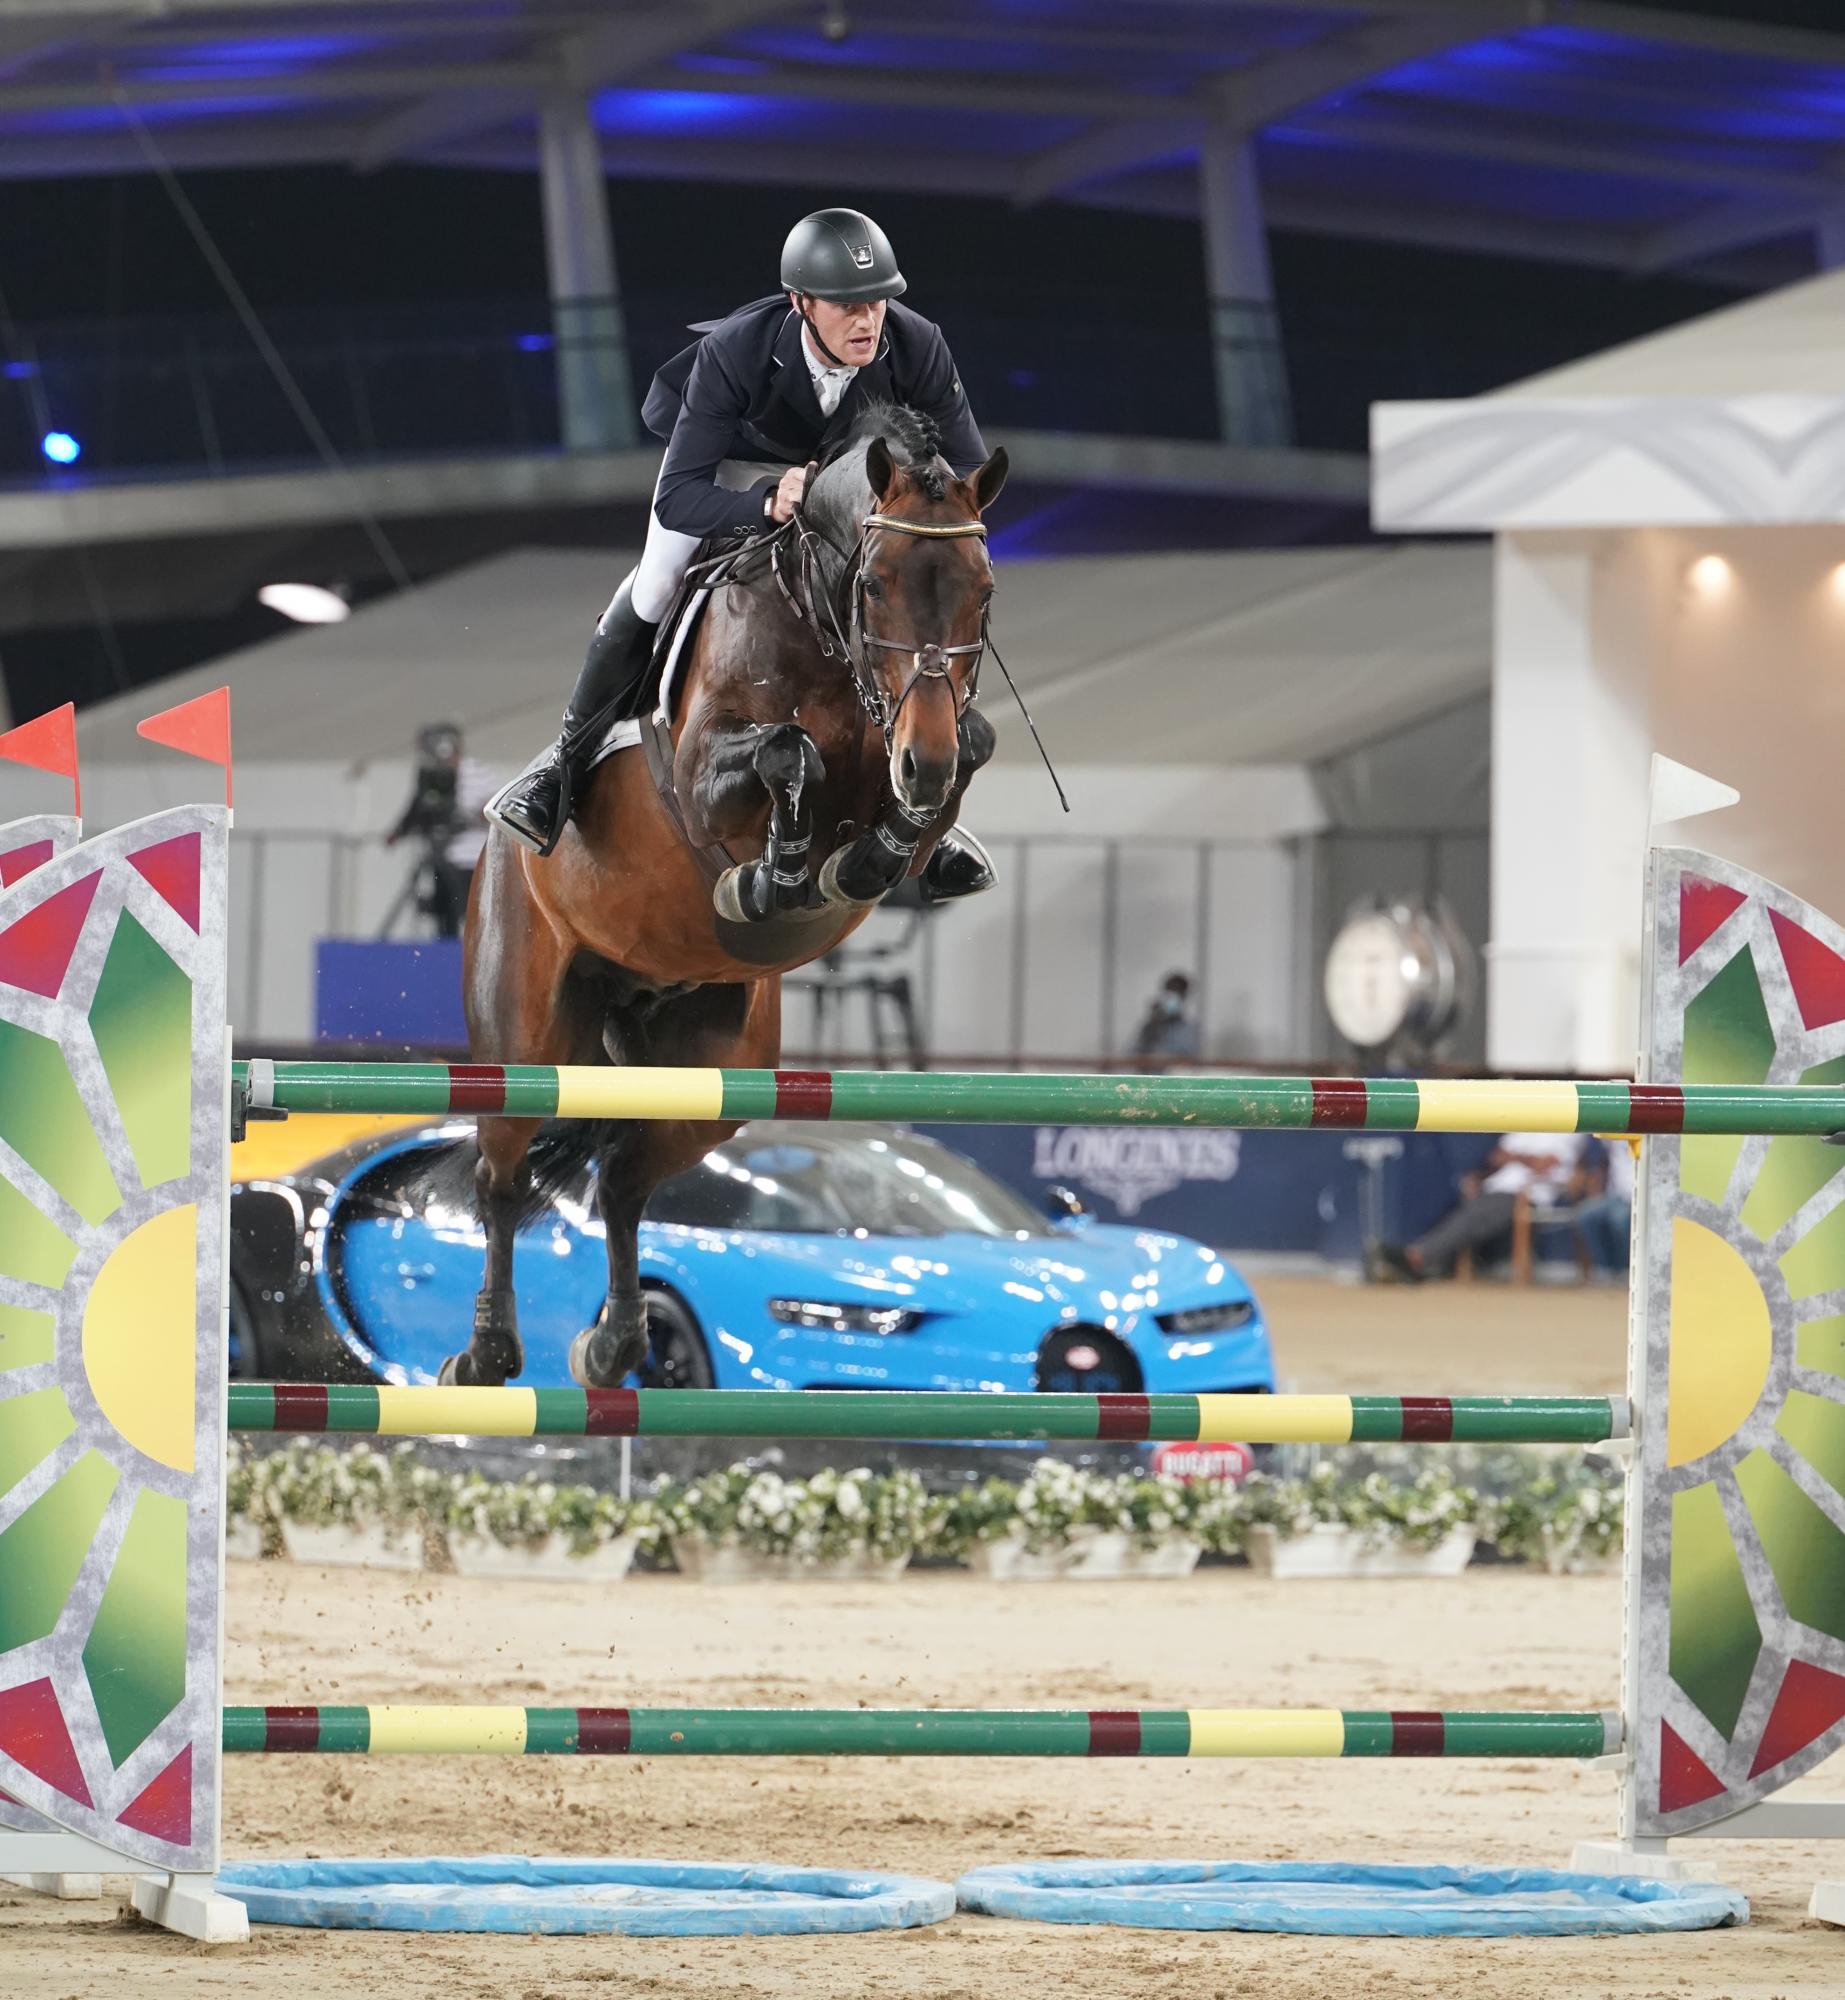 5* Showjumping in Doha